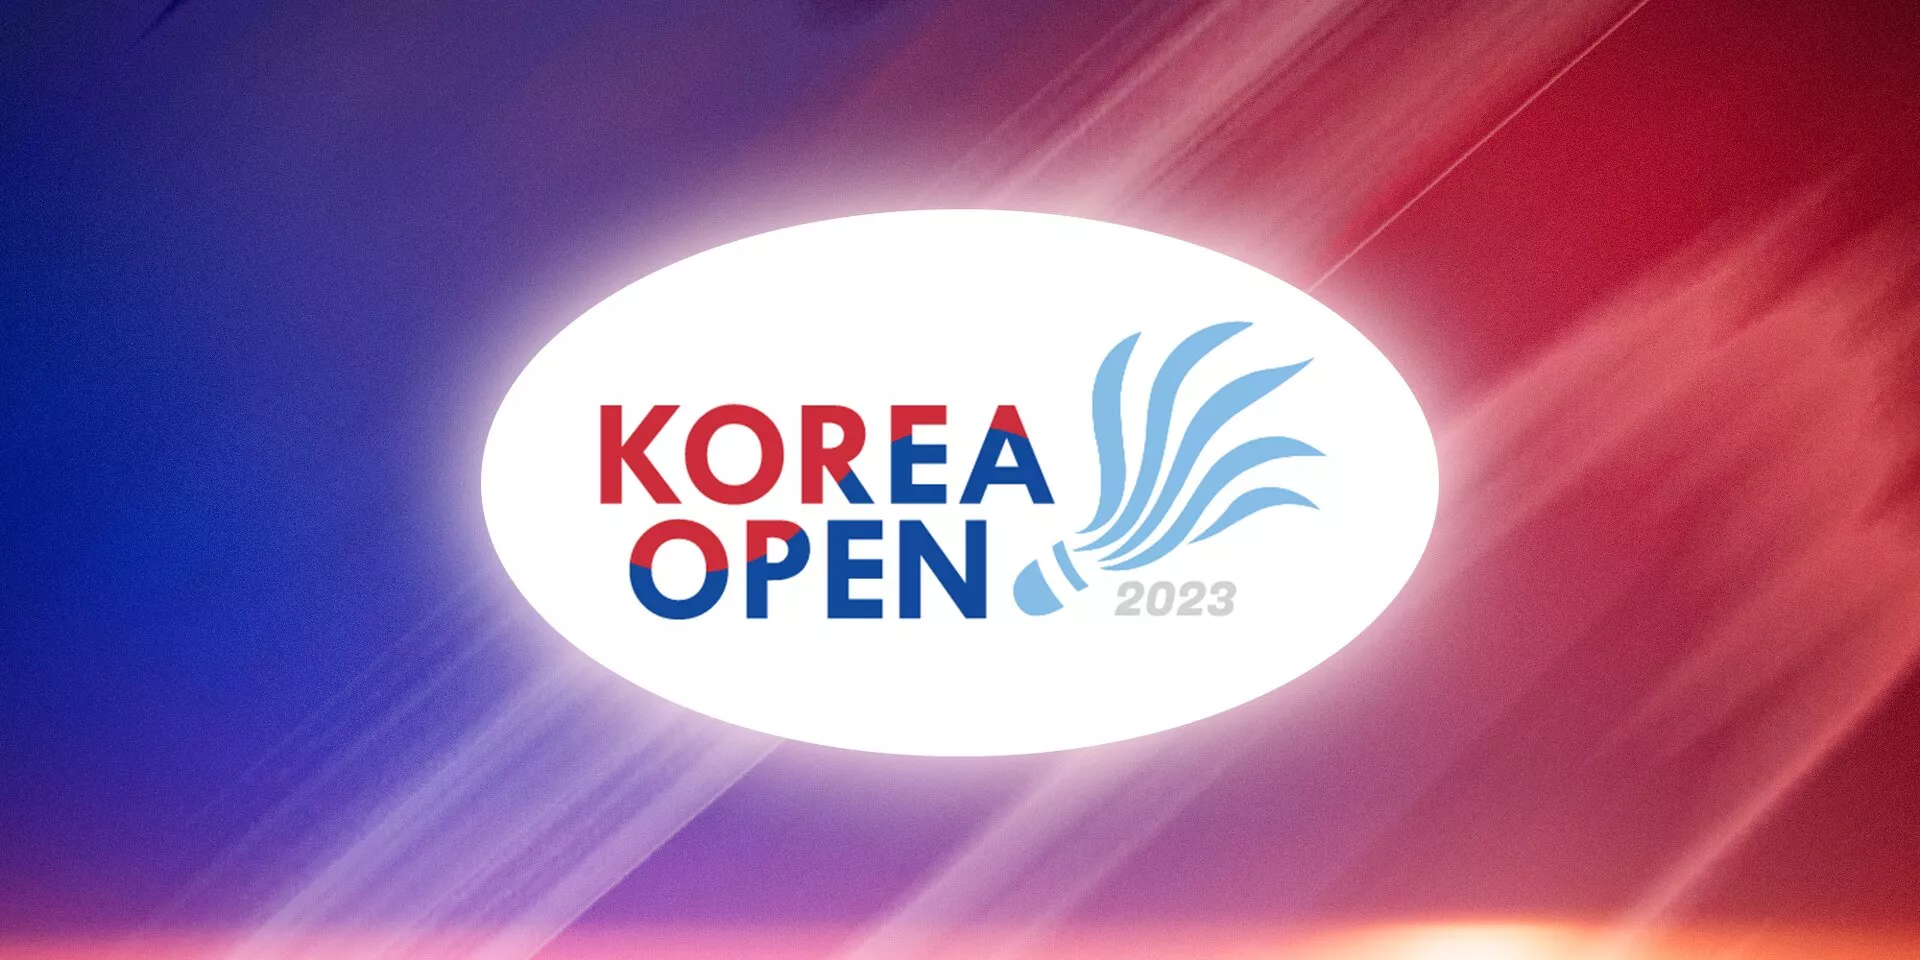 Korea Open 2023 Updated Schedule, fixtures, results and live streaming